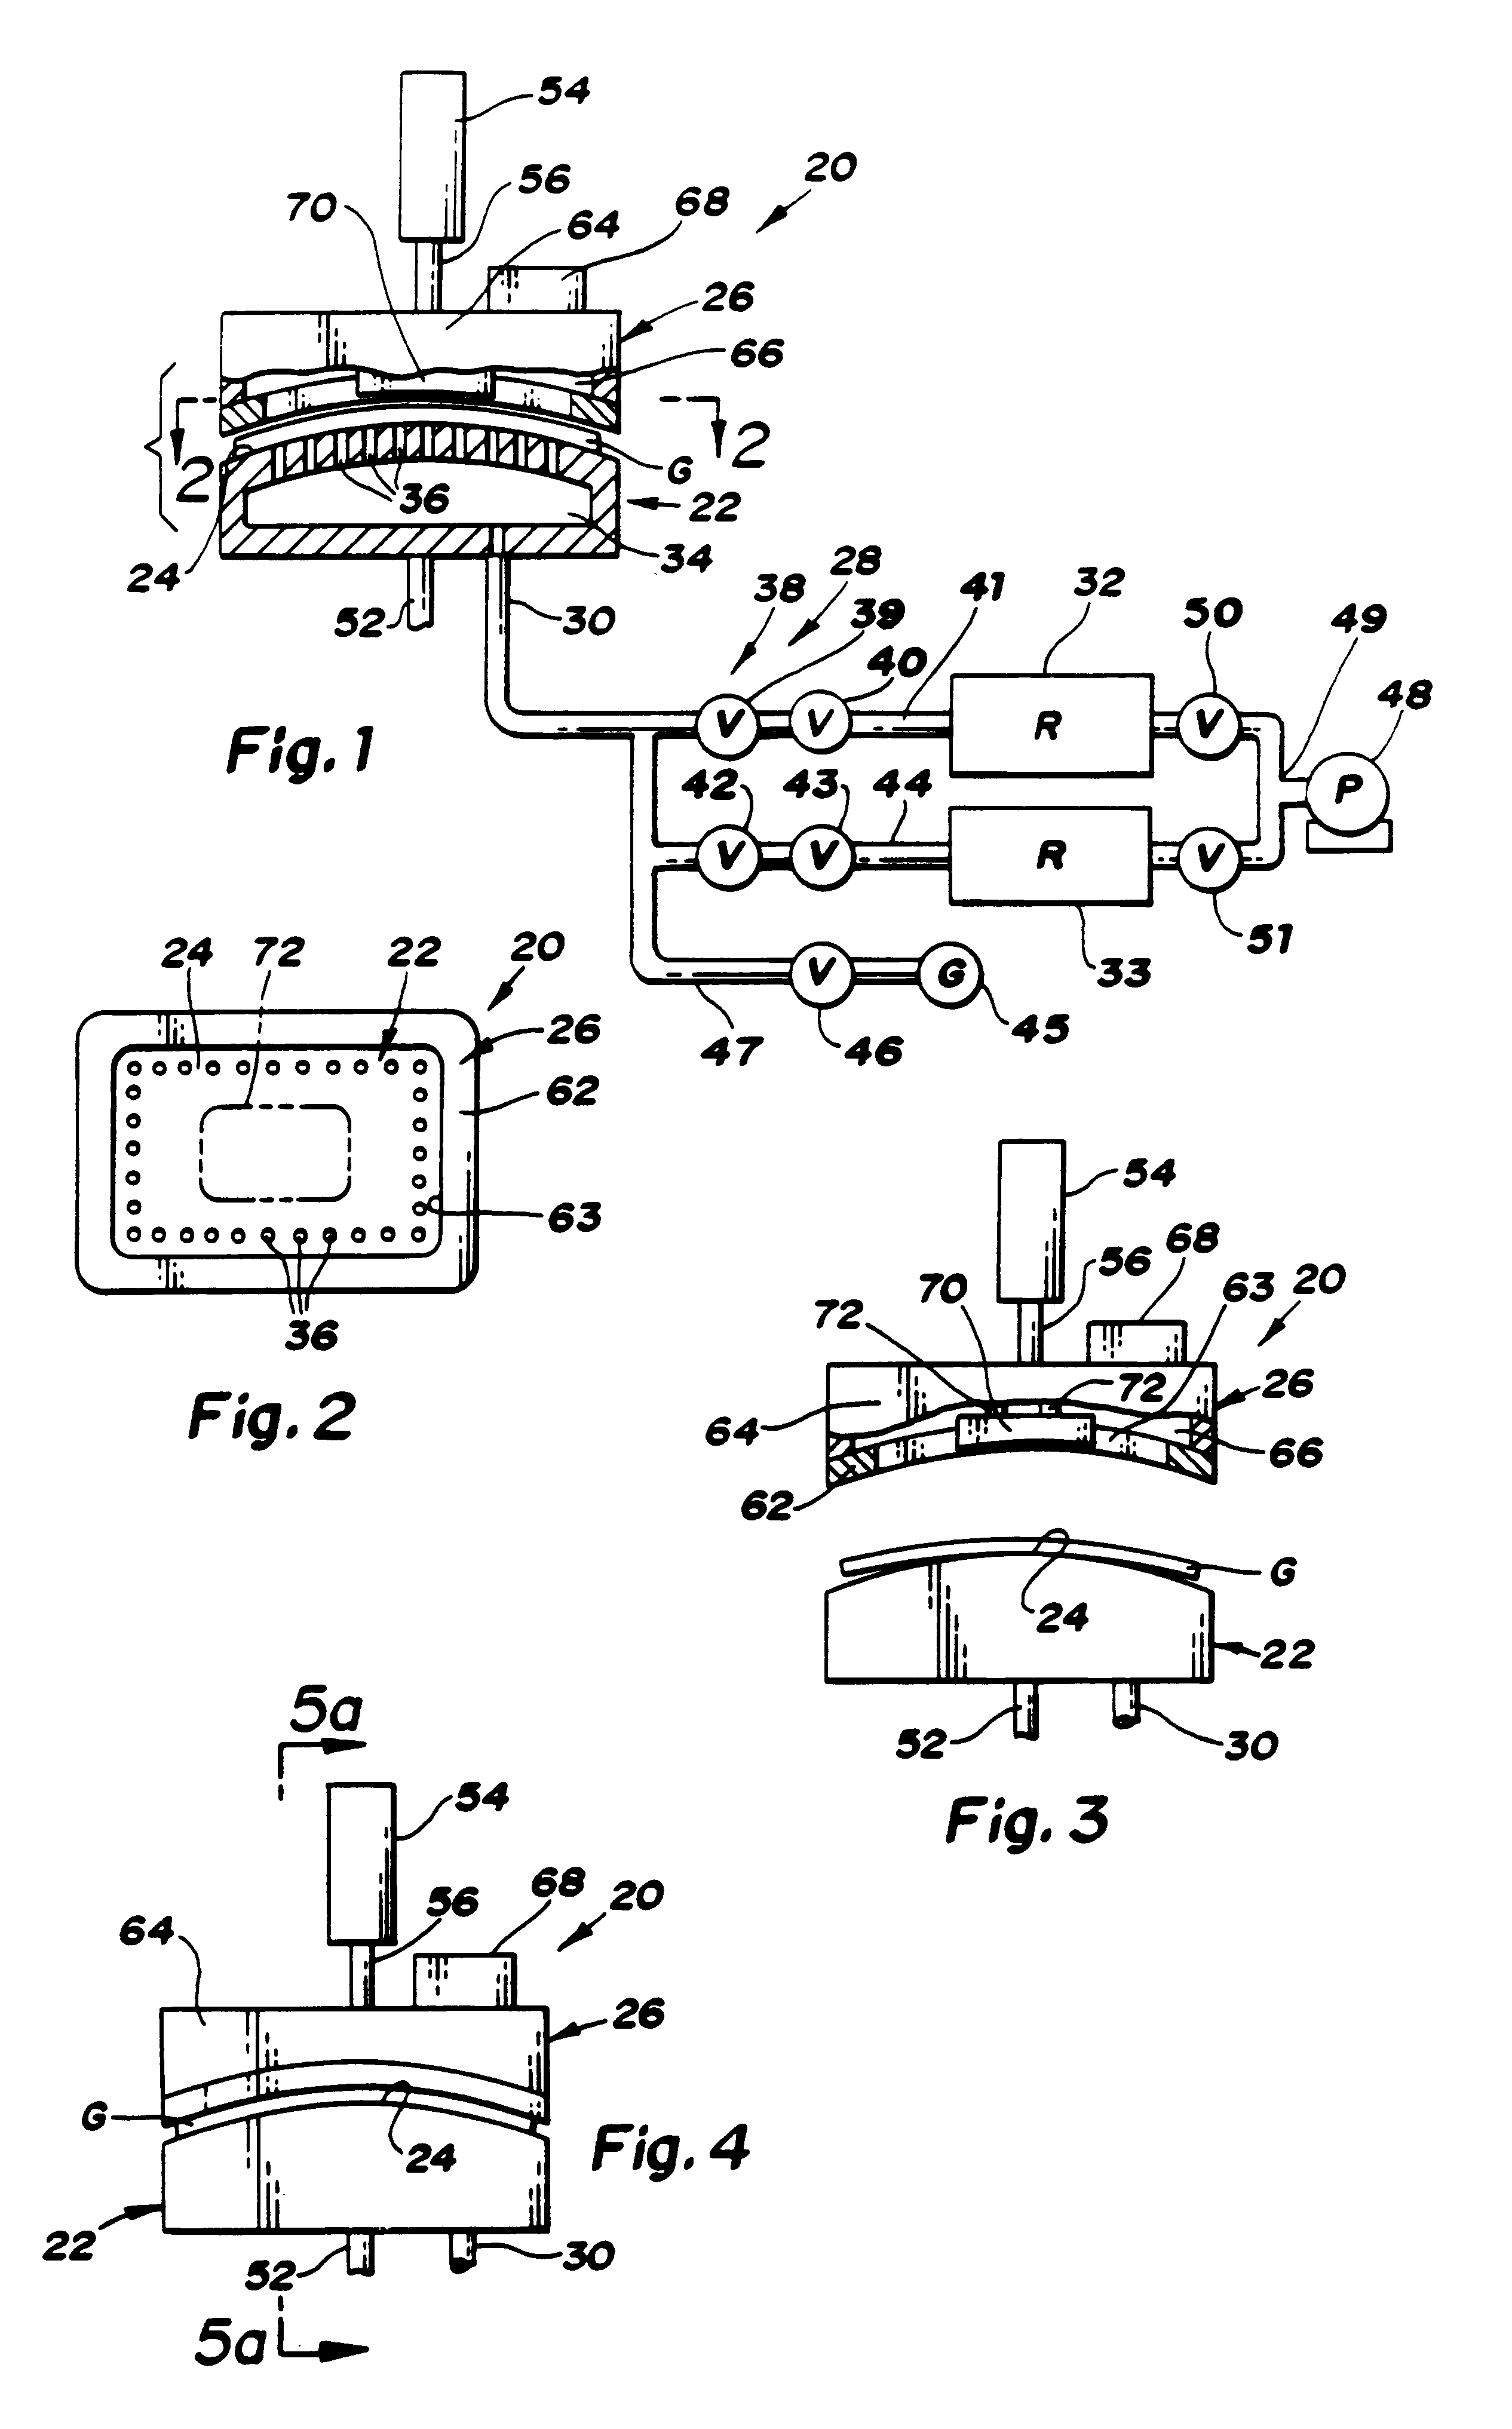 Apparatus for vacuum impulse forming of heated glass sheets